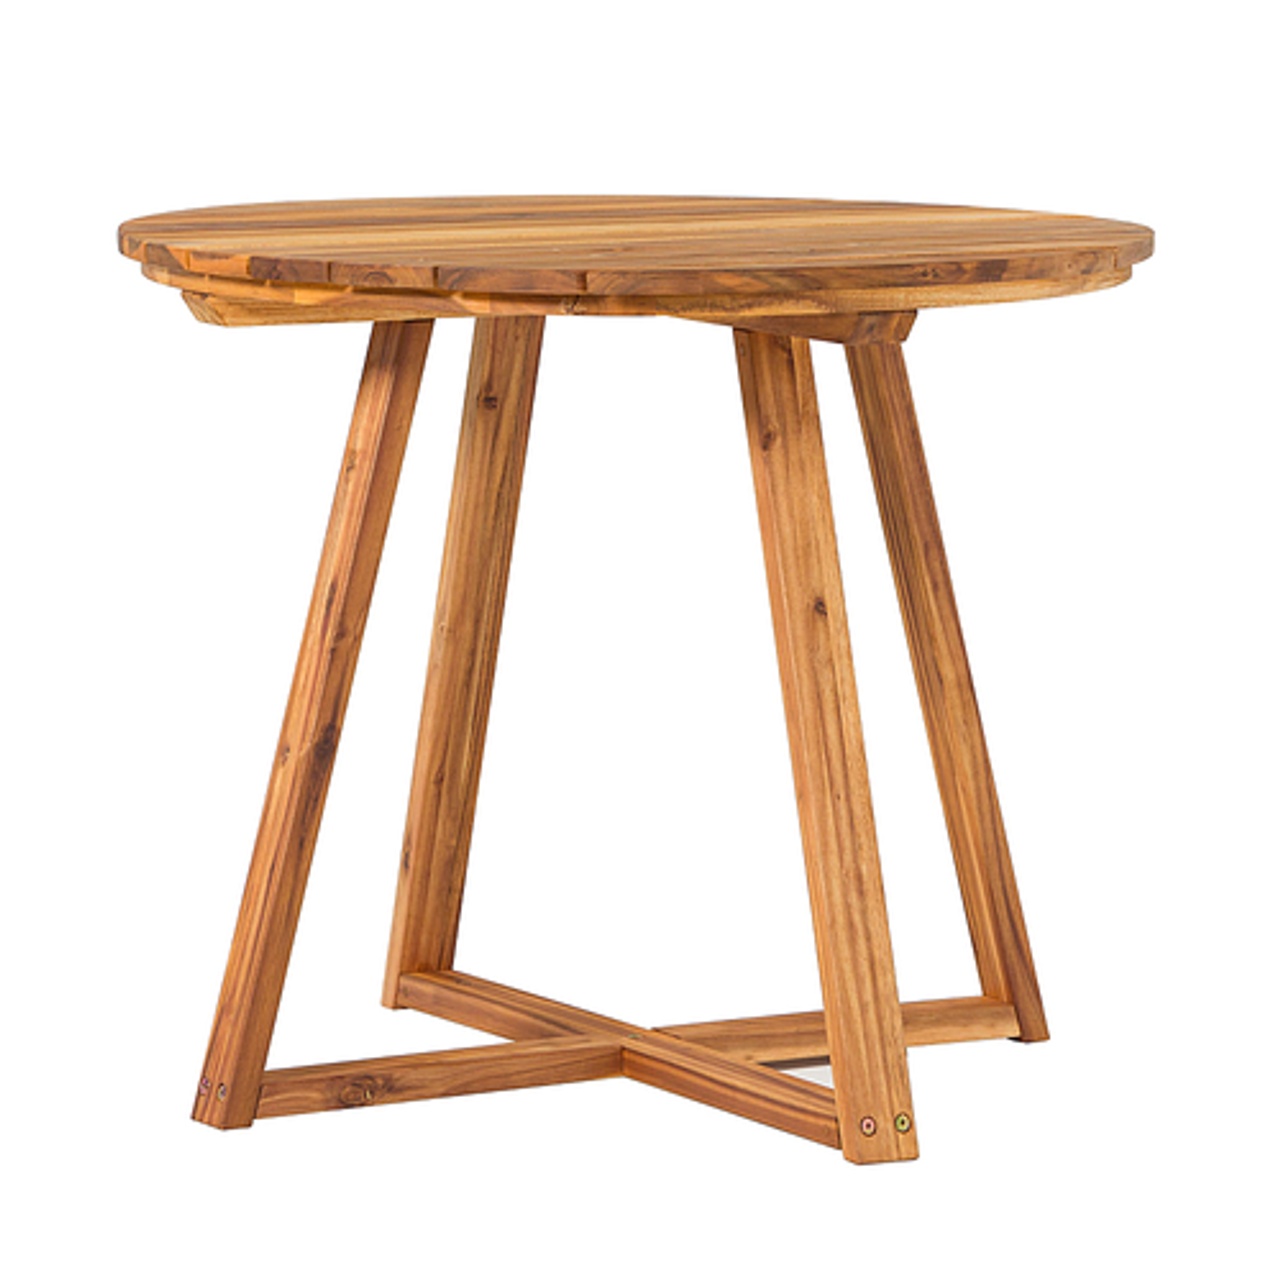 Walker Edison - Modern Solid Acacia Wood Round Outdoor Dining Table - Natural